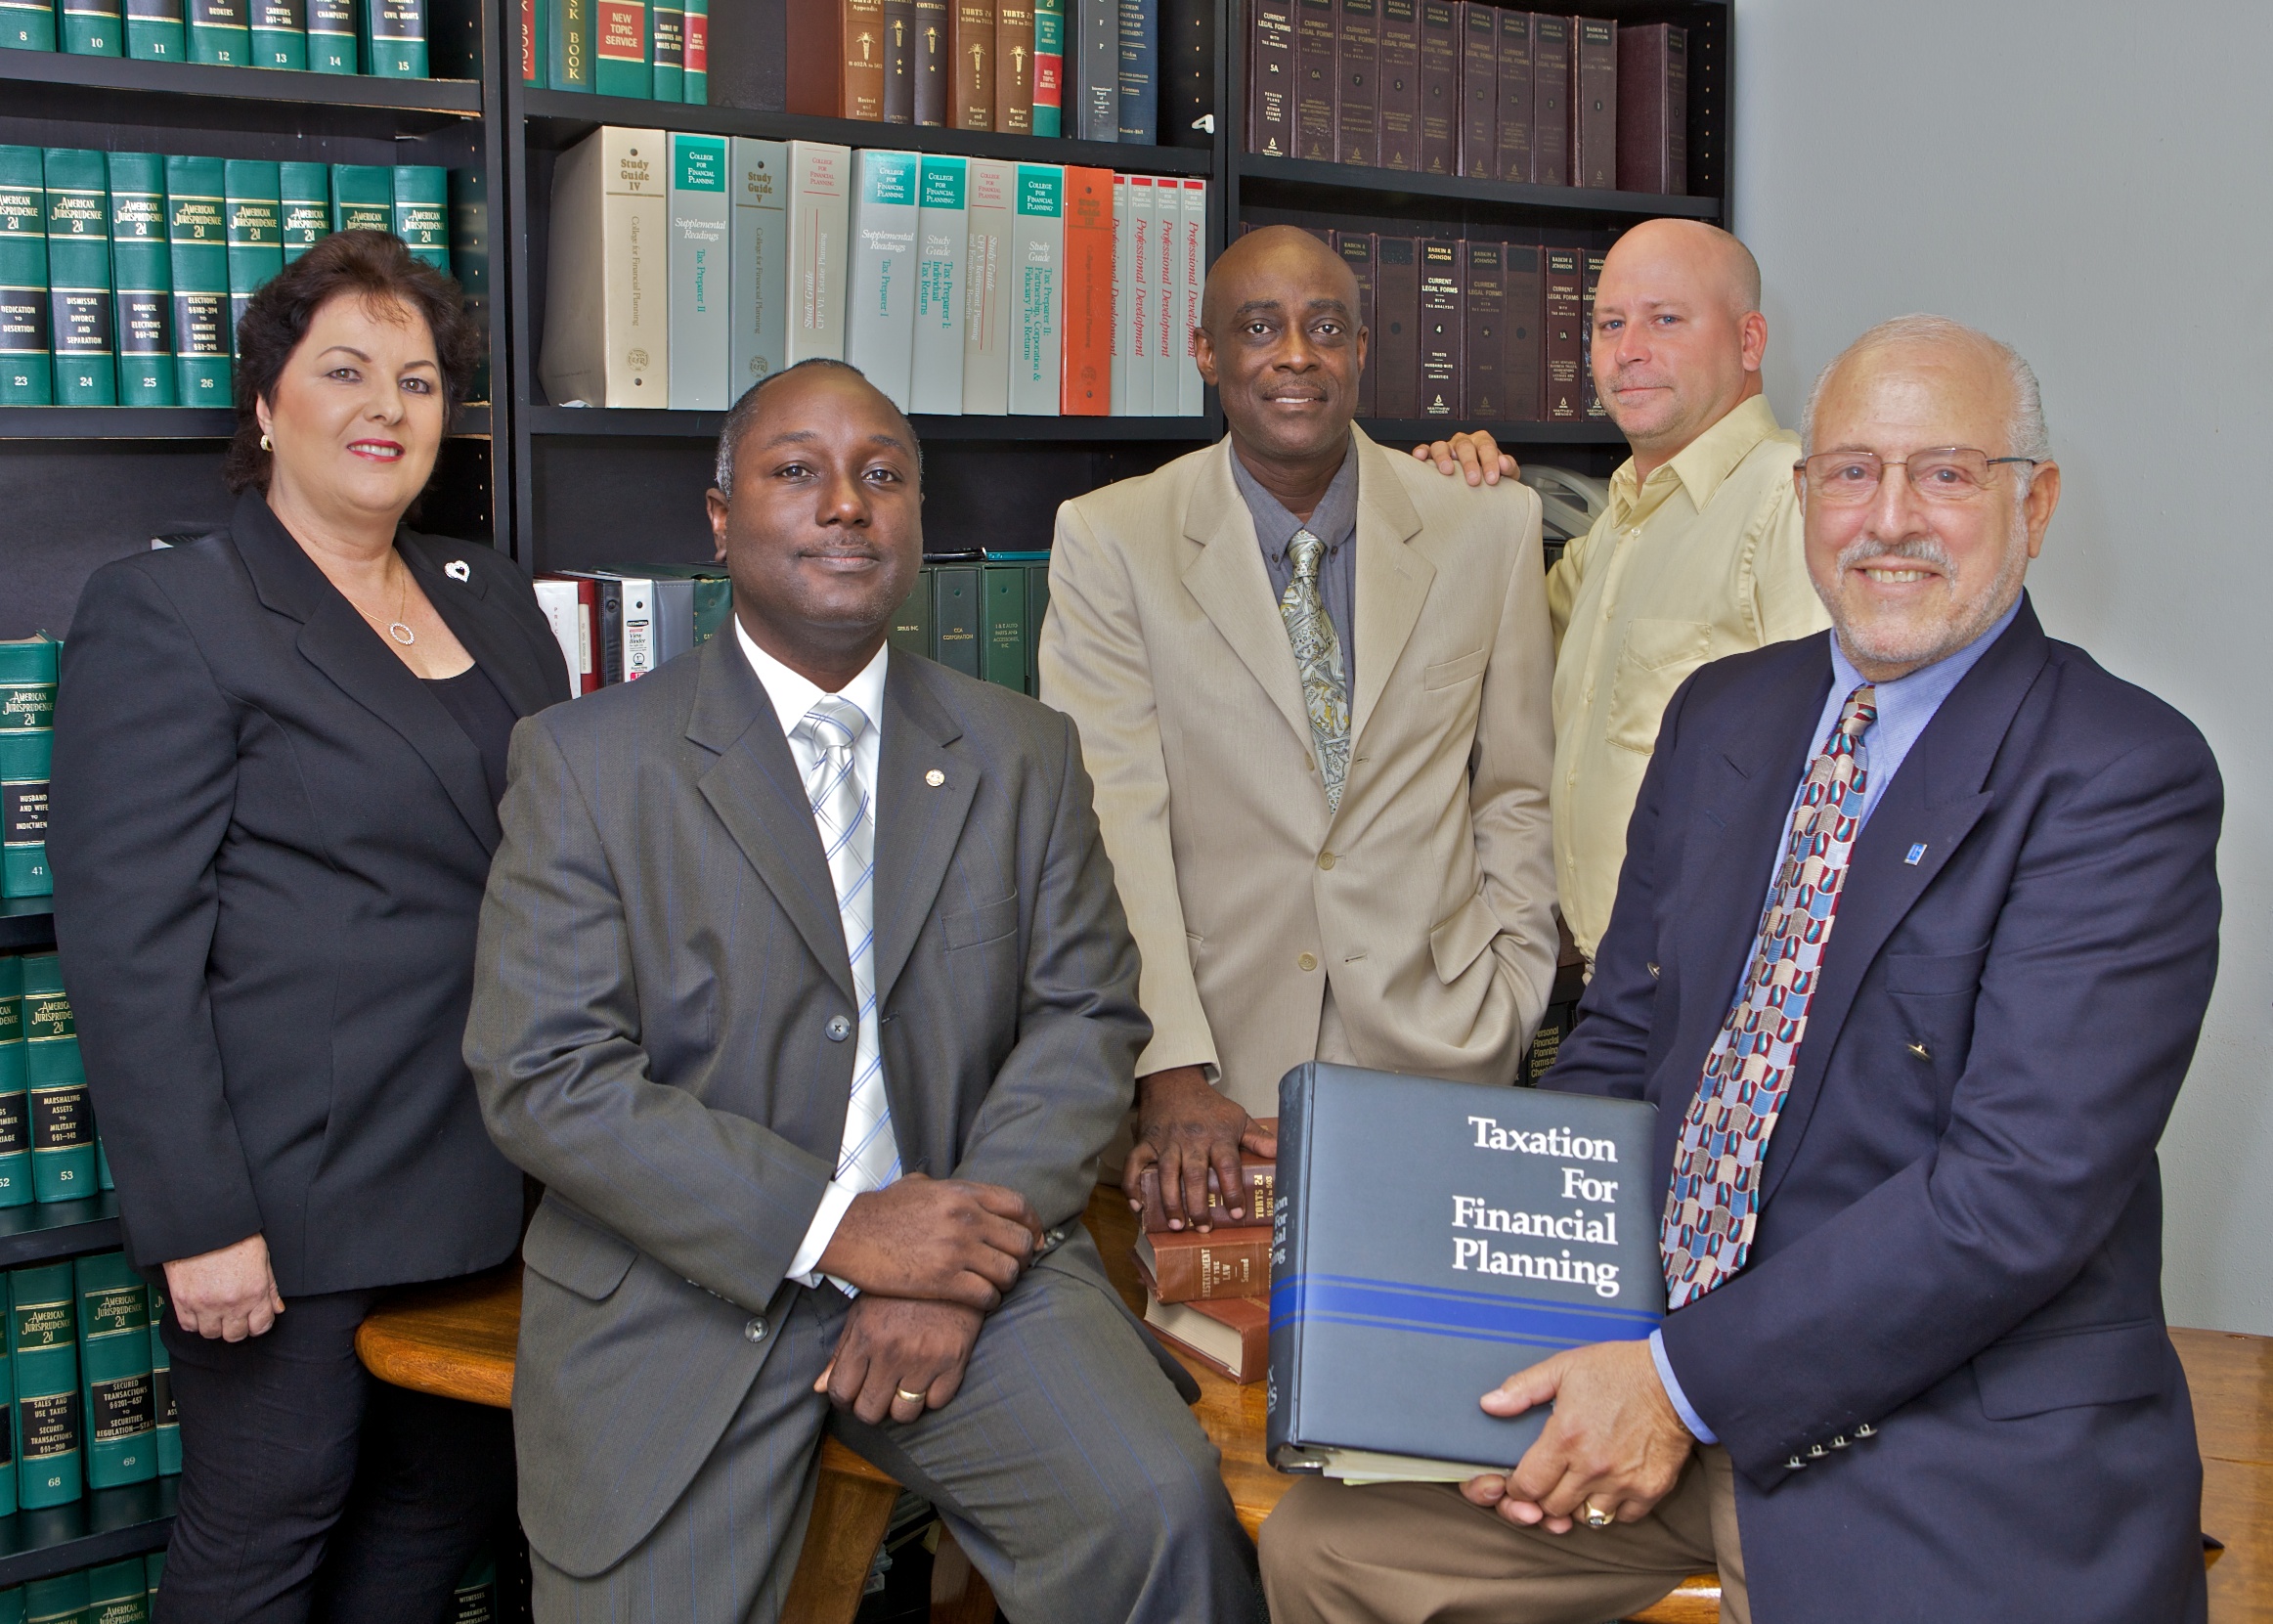 Left to Right: Evelyn Greaux, Eloi George, Ira Christopher, David Osborn, Roger B. Minkoff 